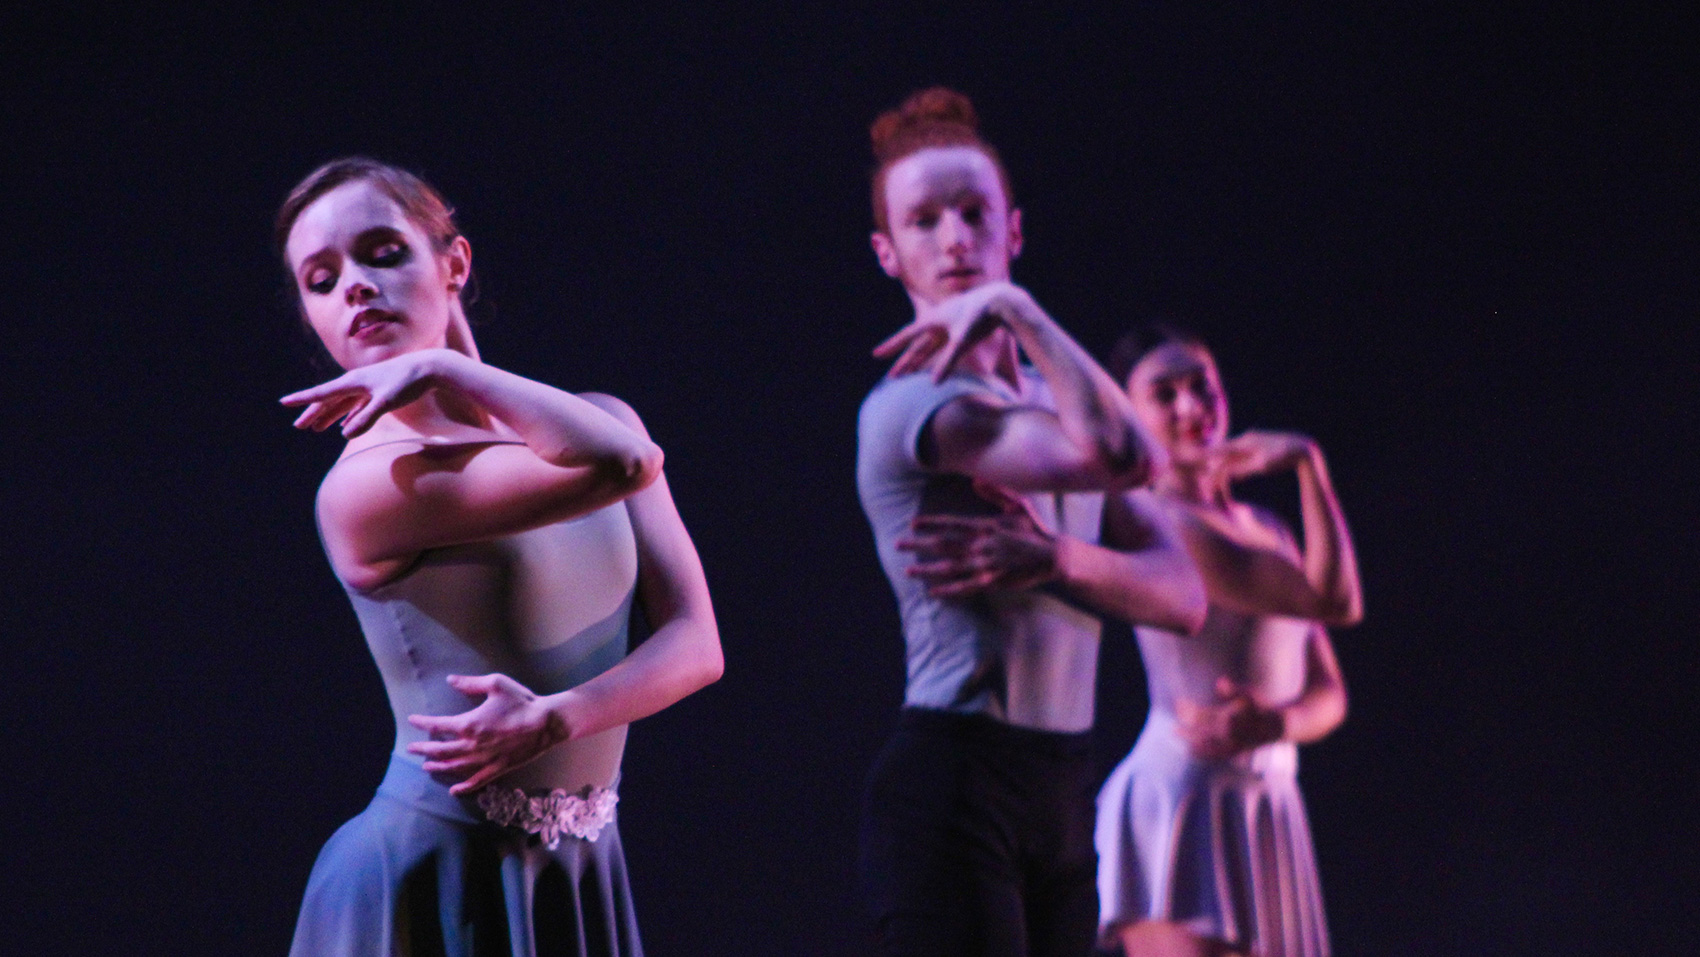 Three ballet dancers hold the same pose: they pose slightly to the side, they look over their right shoulder and raise their right arm to the front, lifting their hand to graze their chin. Their rest their other hand on the right side of their stomach.